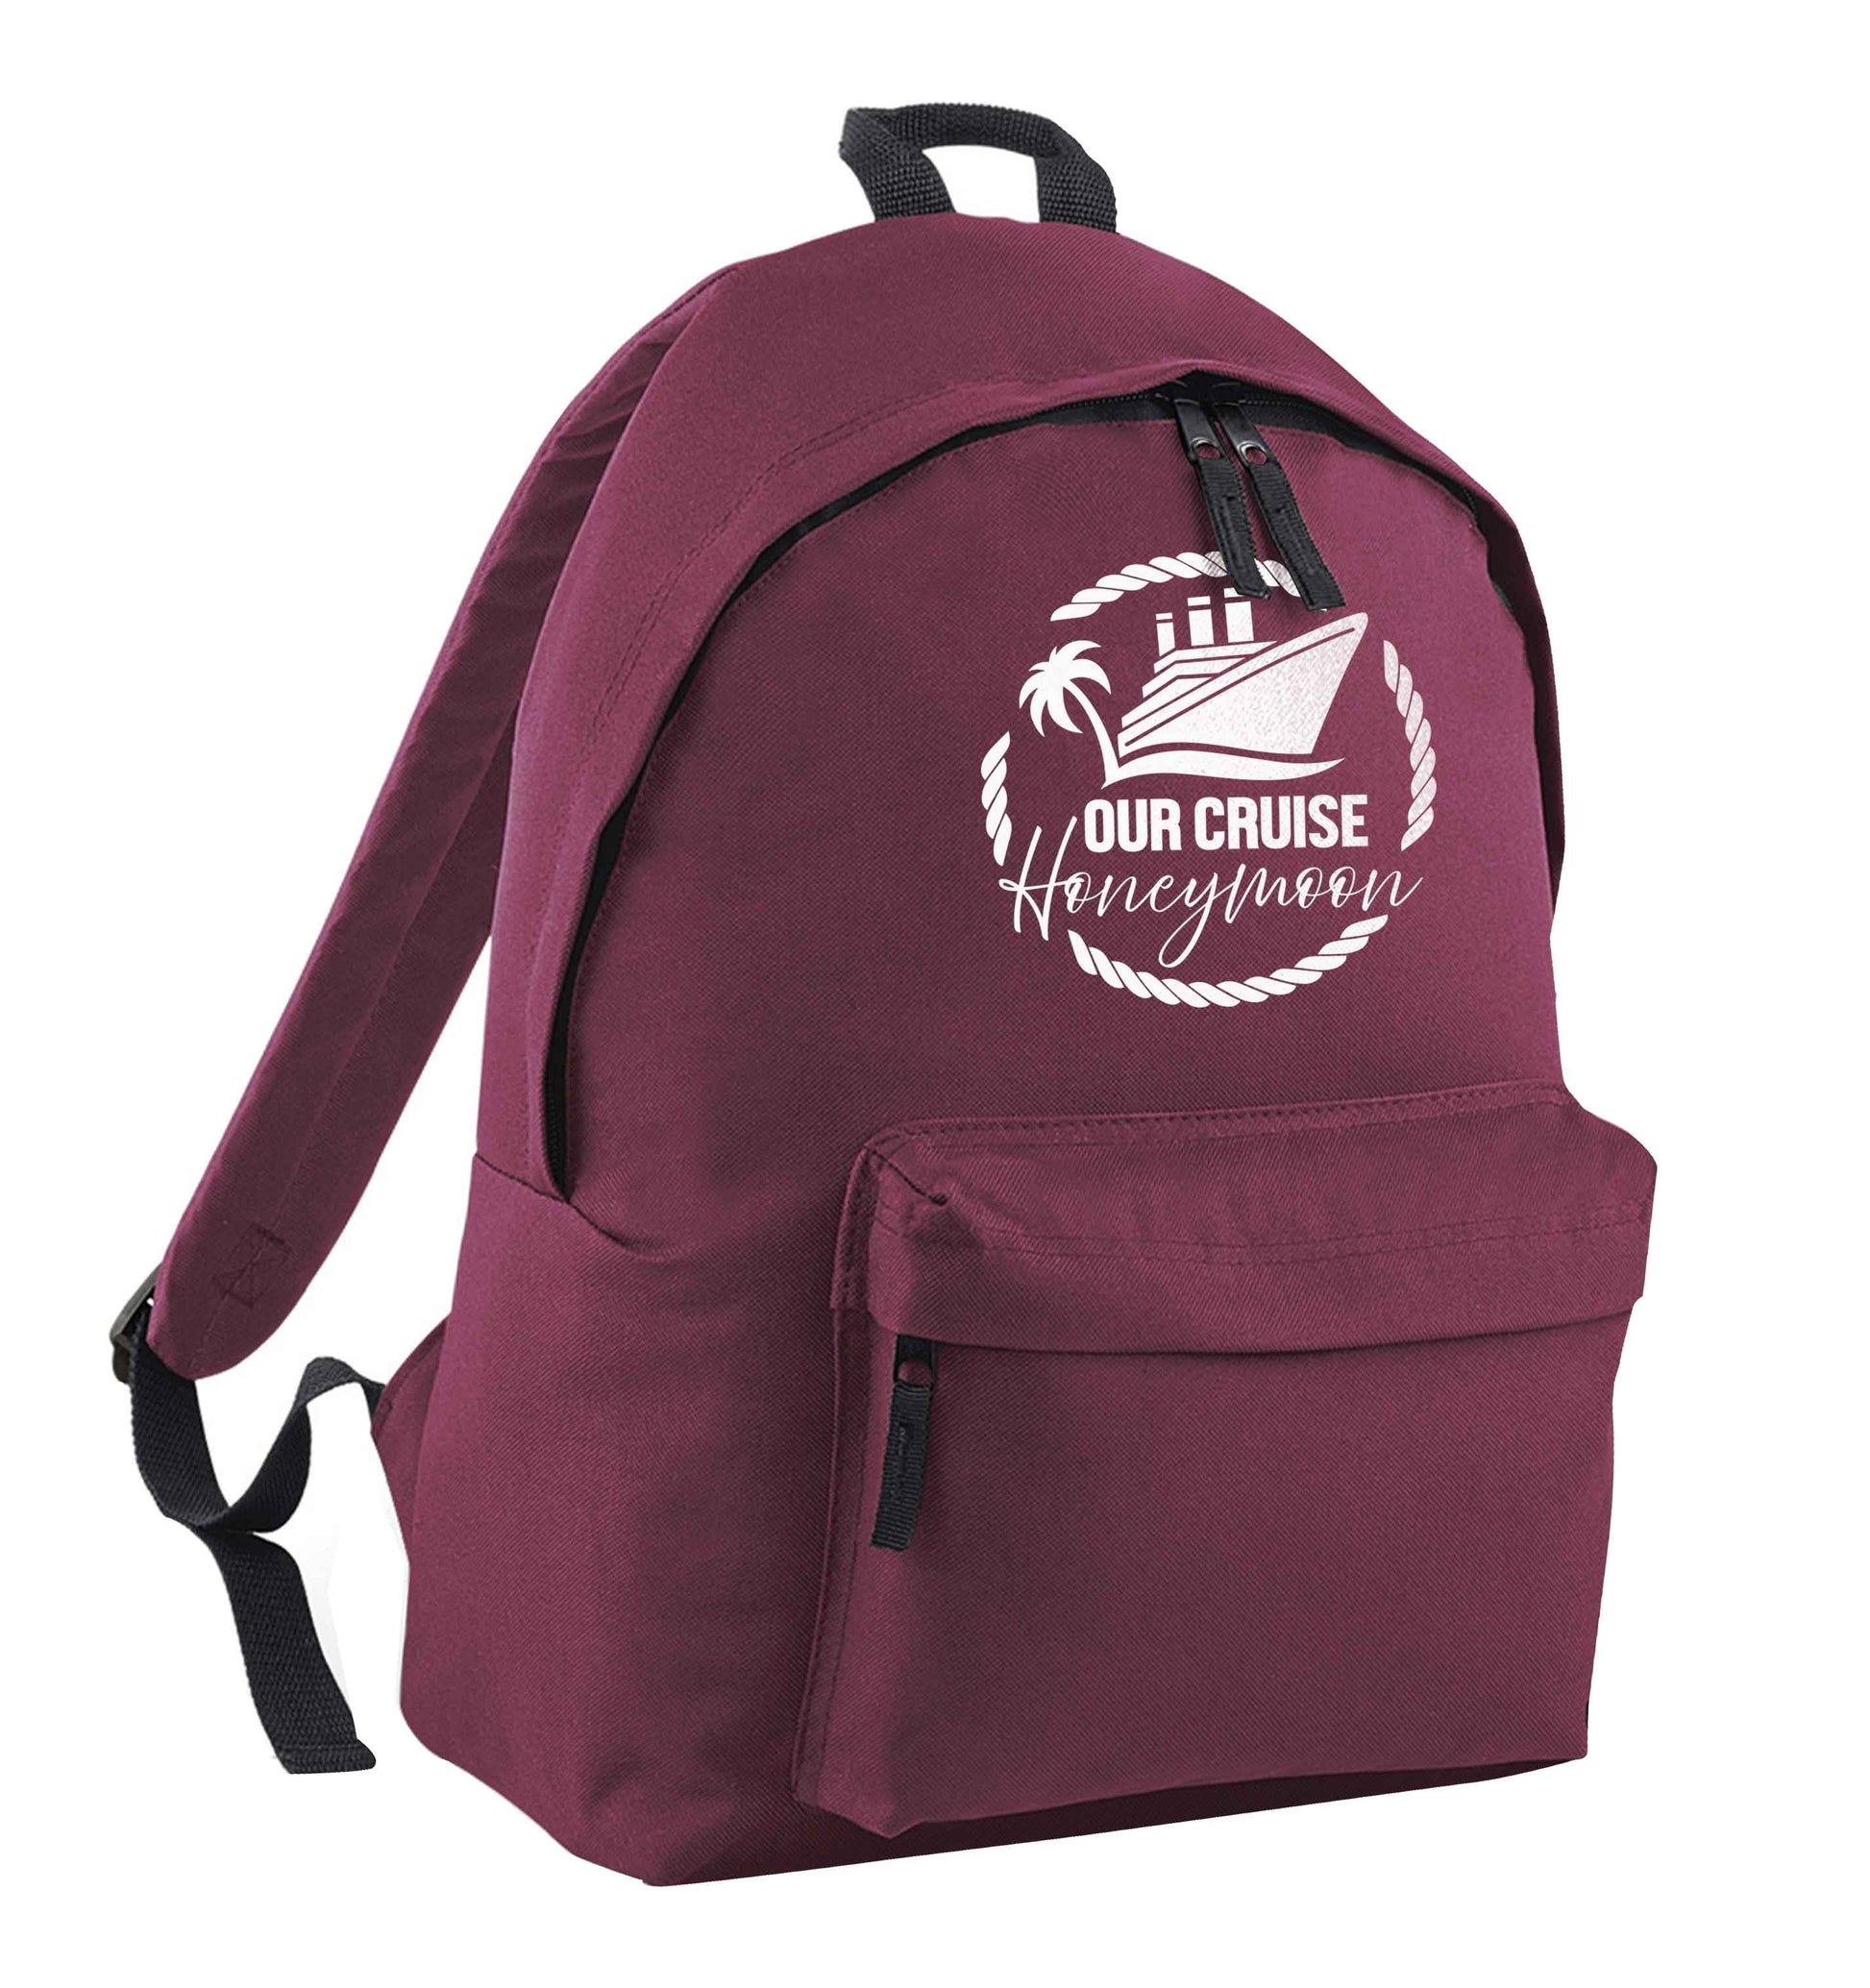 Our cruise honeymoon maroon adults backpack